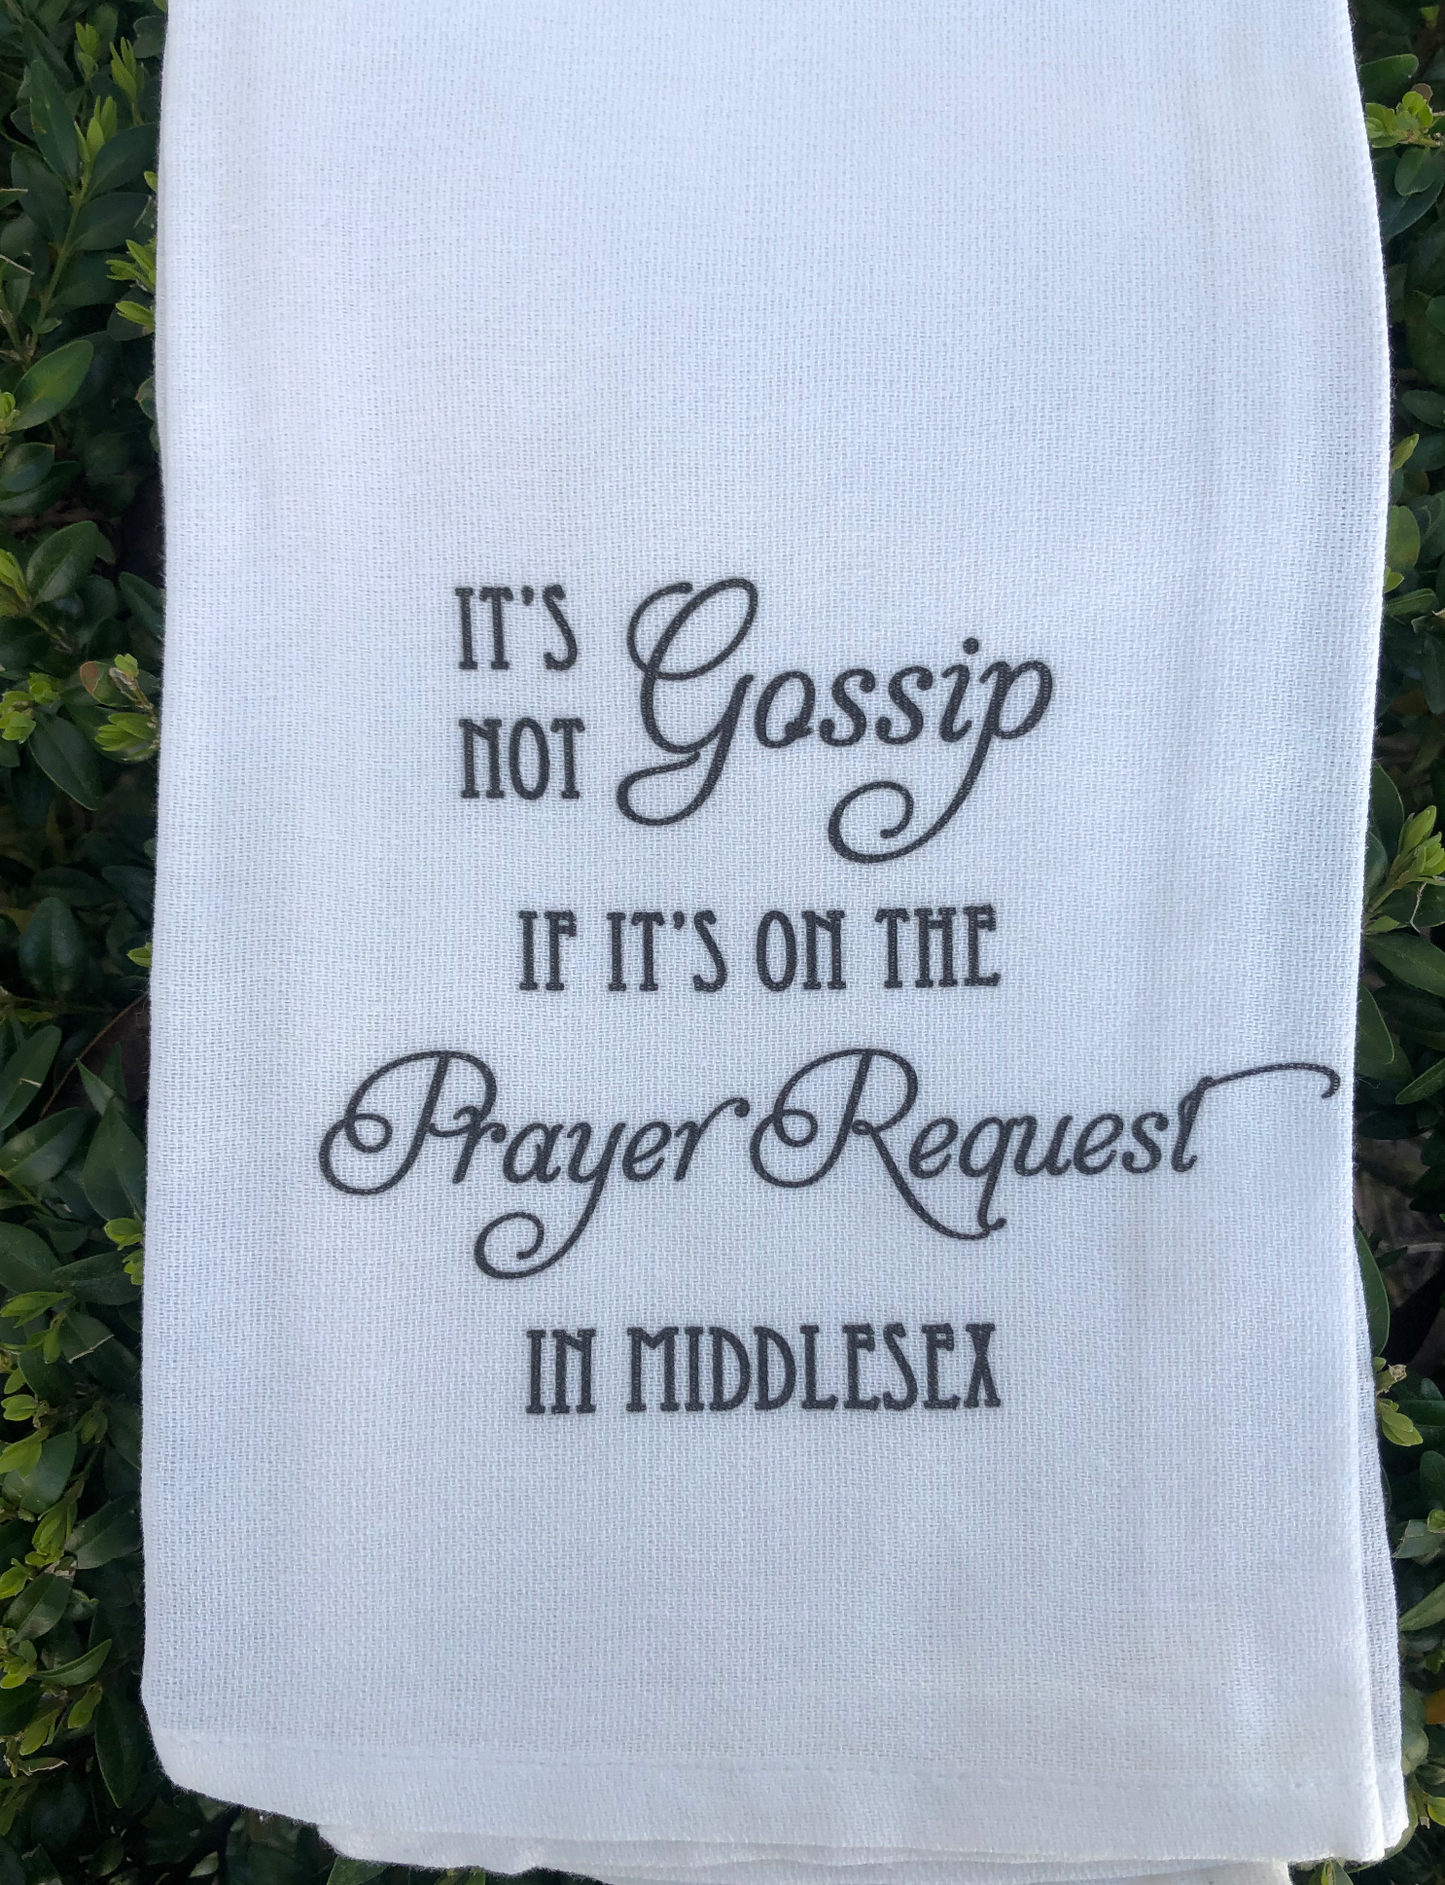 IT'S NOT GOSSIP IF IT'S ONTHE PRAYER REQUEST IN MIDDLESEX